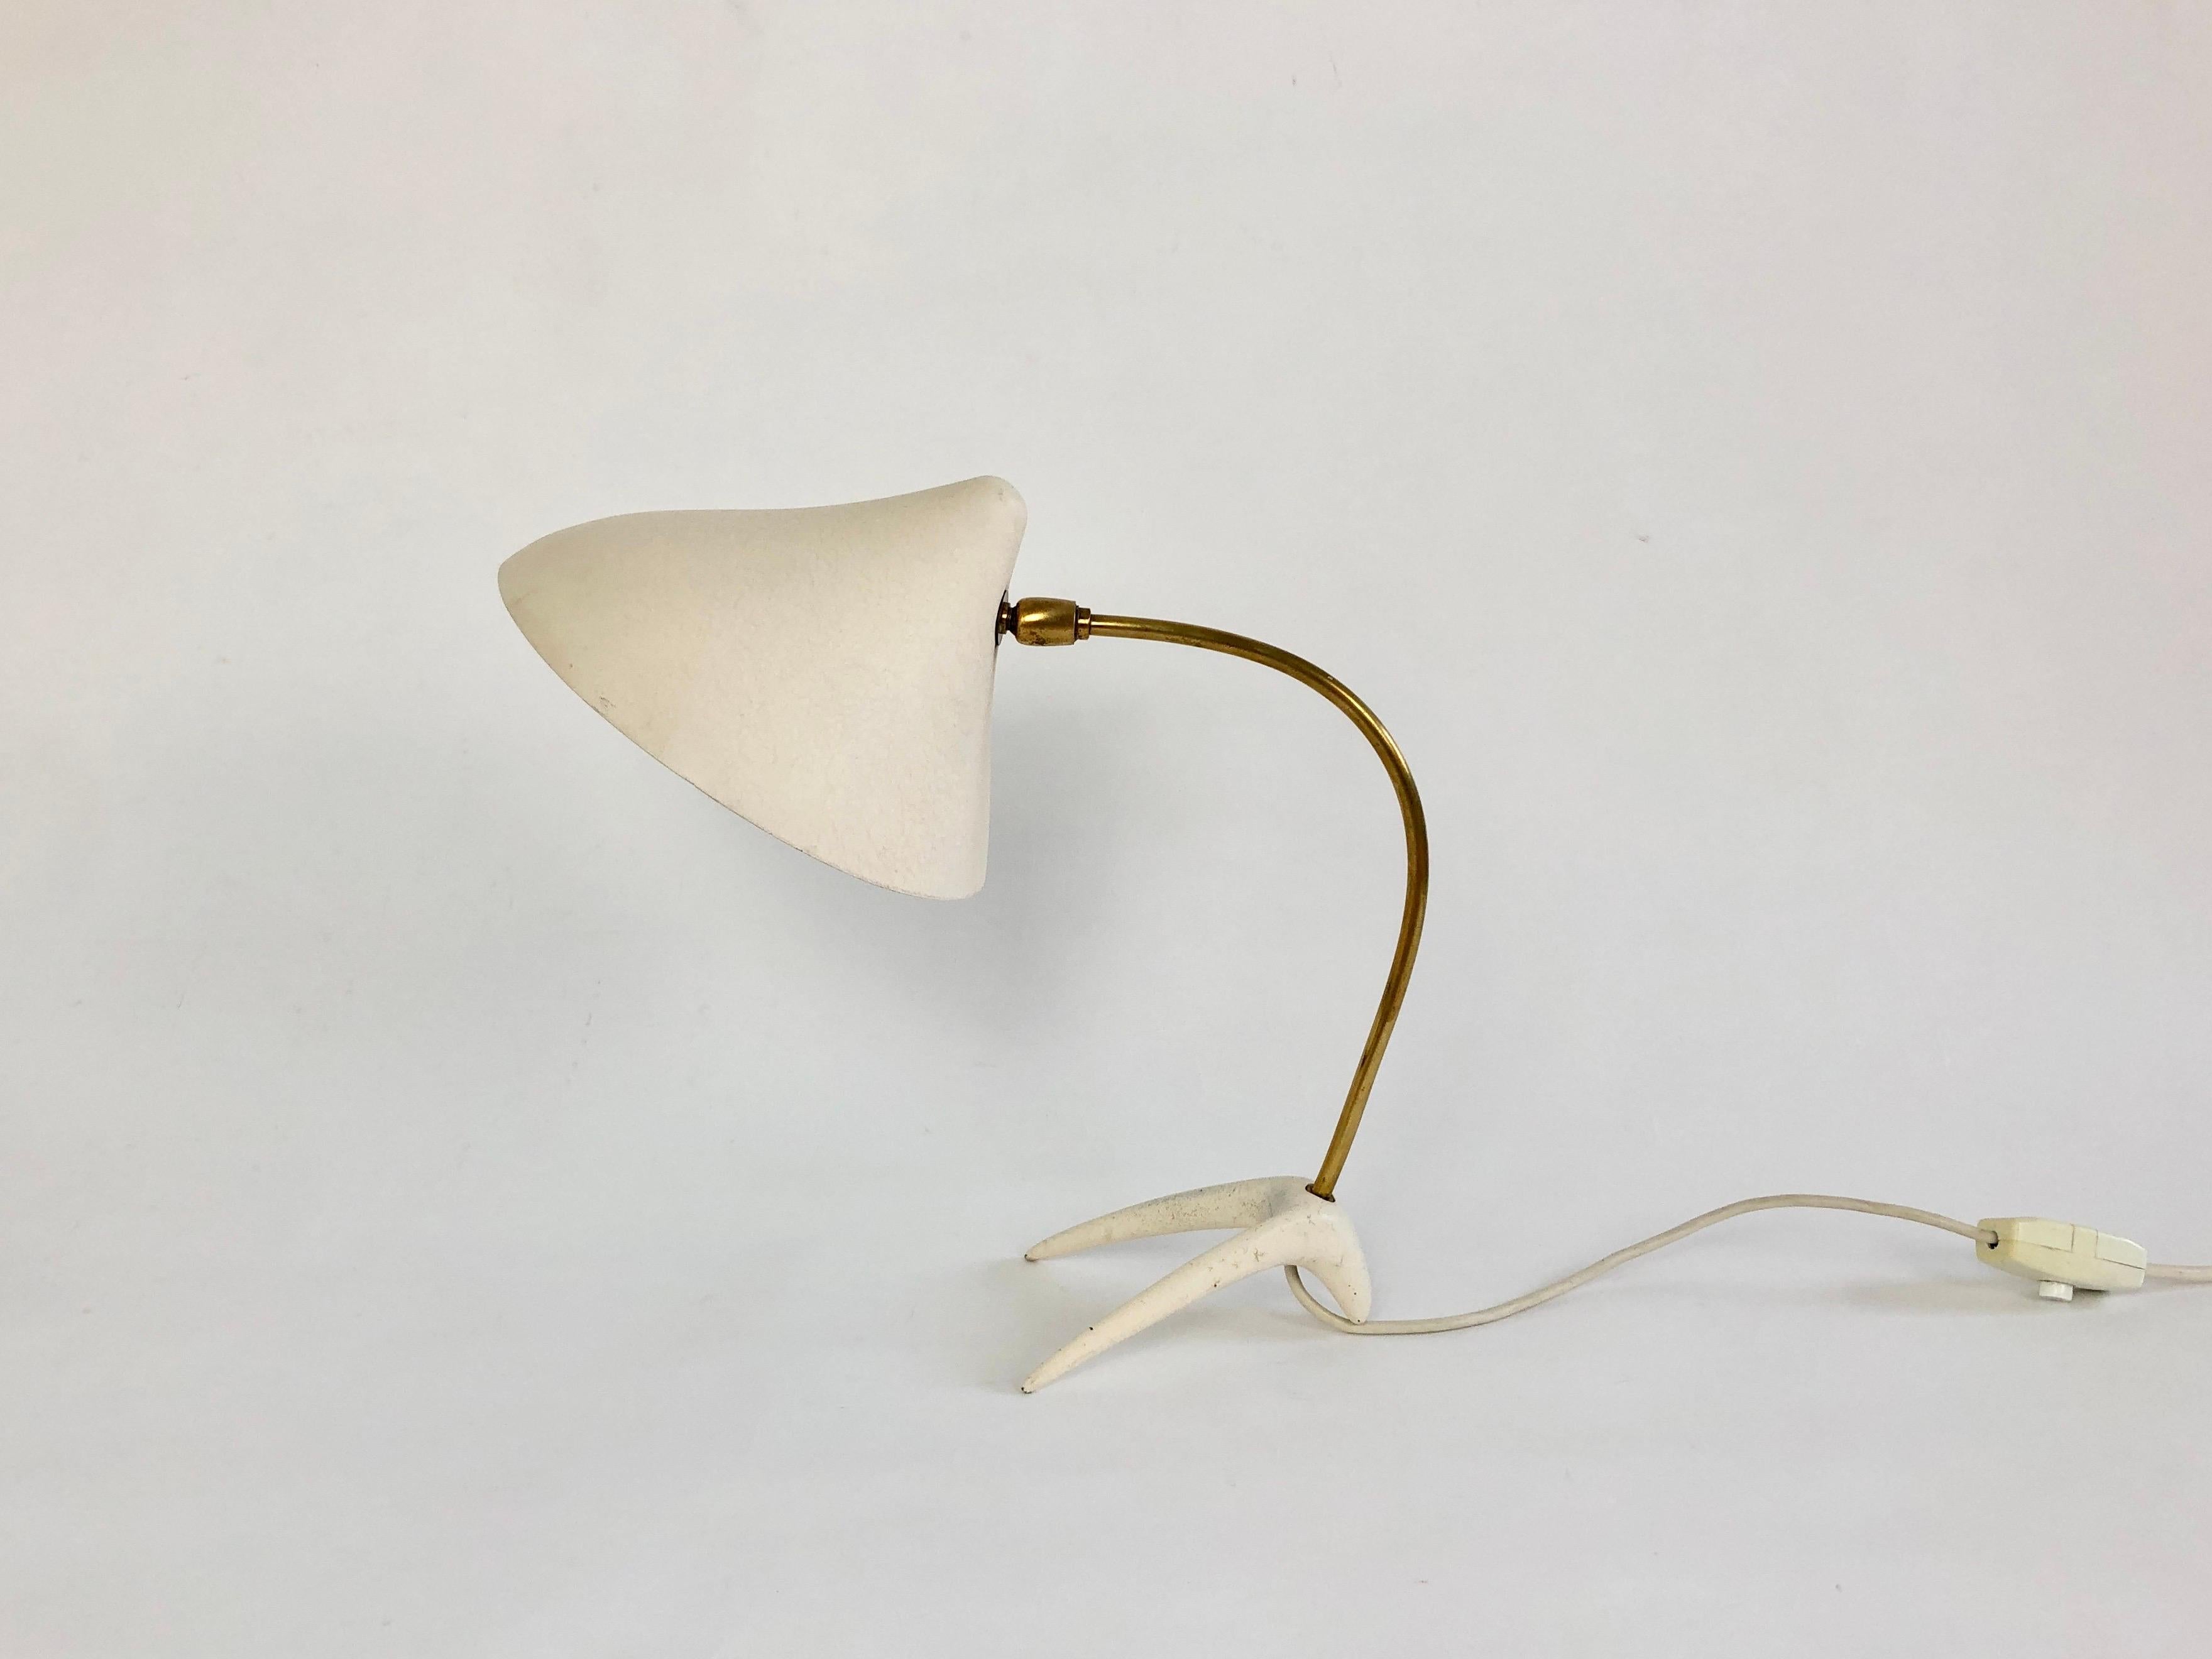 Crow's Foot table table lamp by German lighting company Cosack.

Often (mis)attributed to Louis Kalff and Philips (Philips never designed a crows foot lamp, Kalff never designed for Cosack).

Original white crackle effect painted shade and